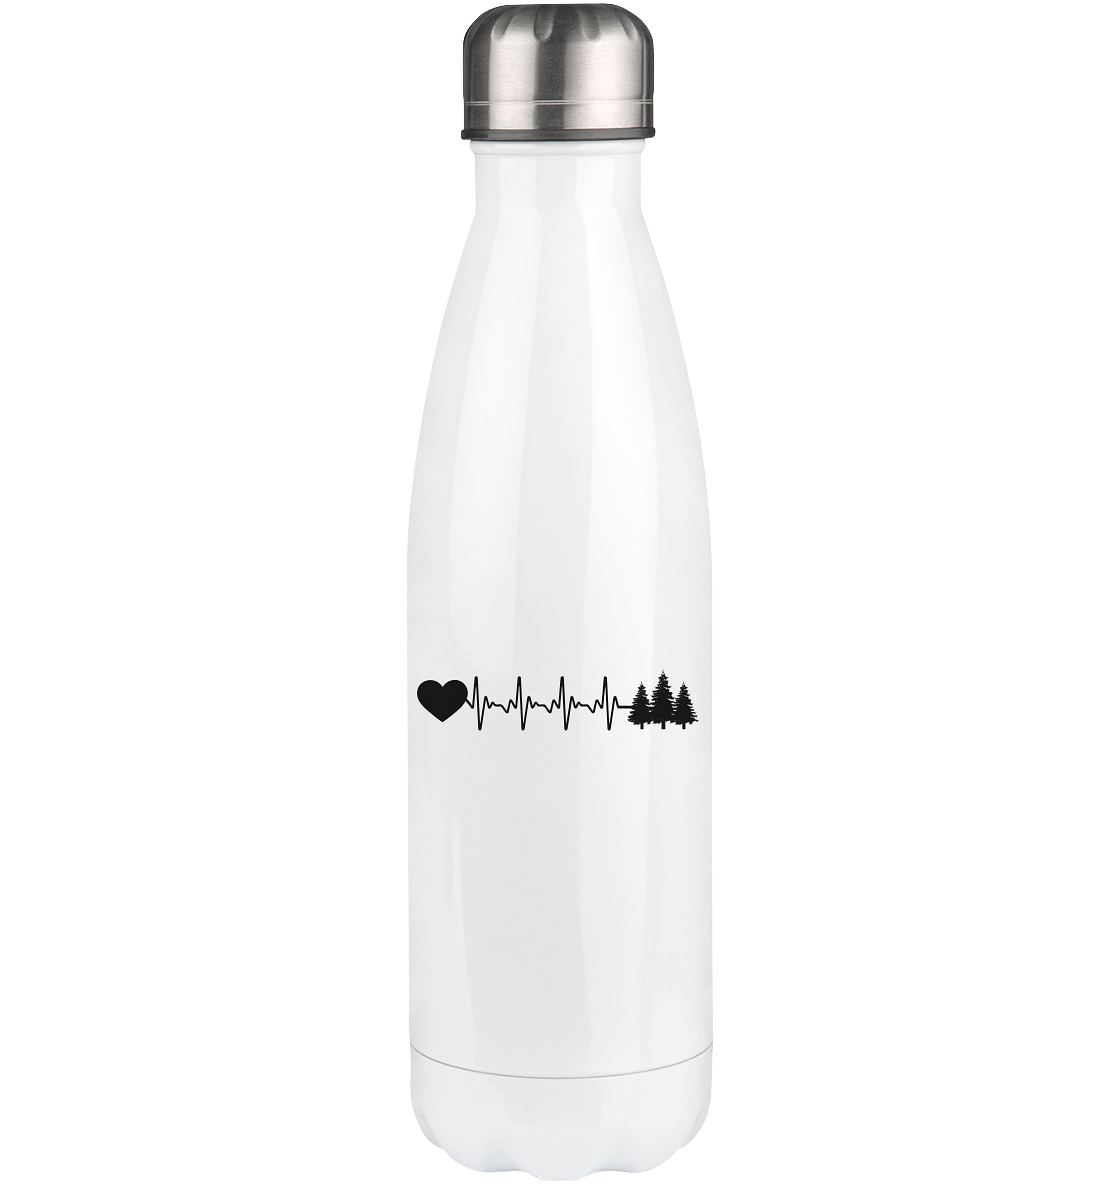 Heartbeat Heart and Trees - Edelstahl Thermosflasche camping UONP 500ml